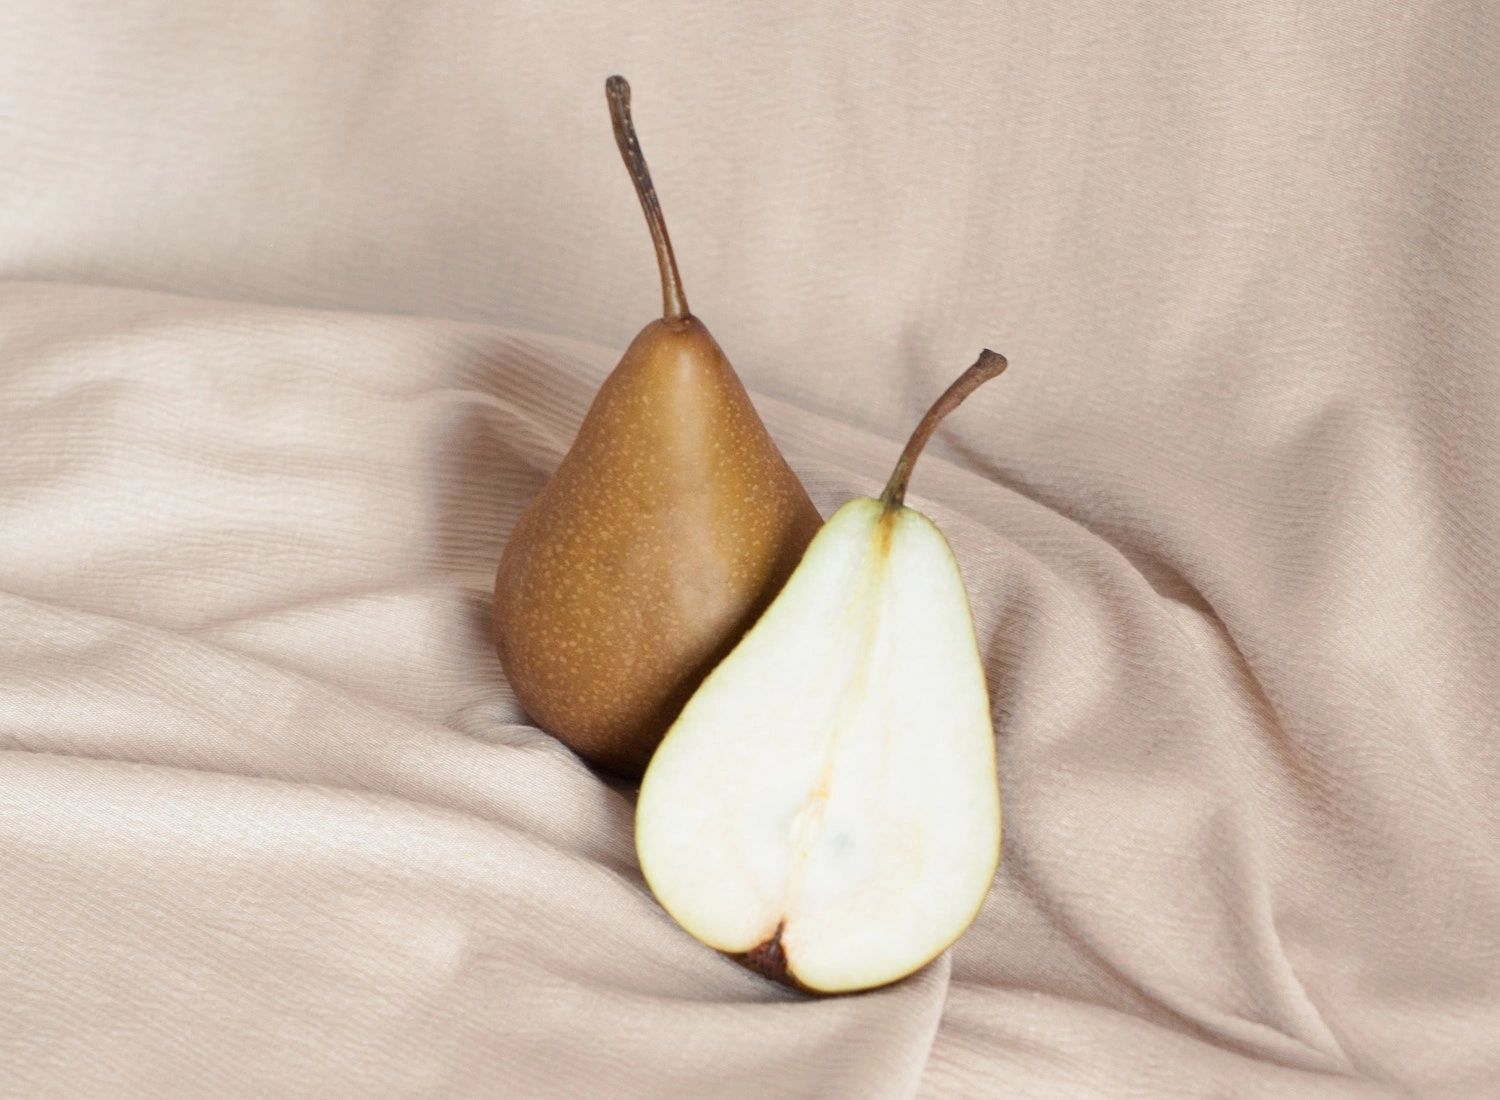 Pears on a neutral background